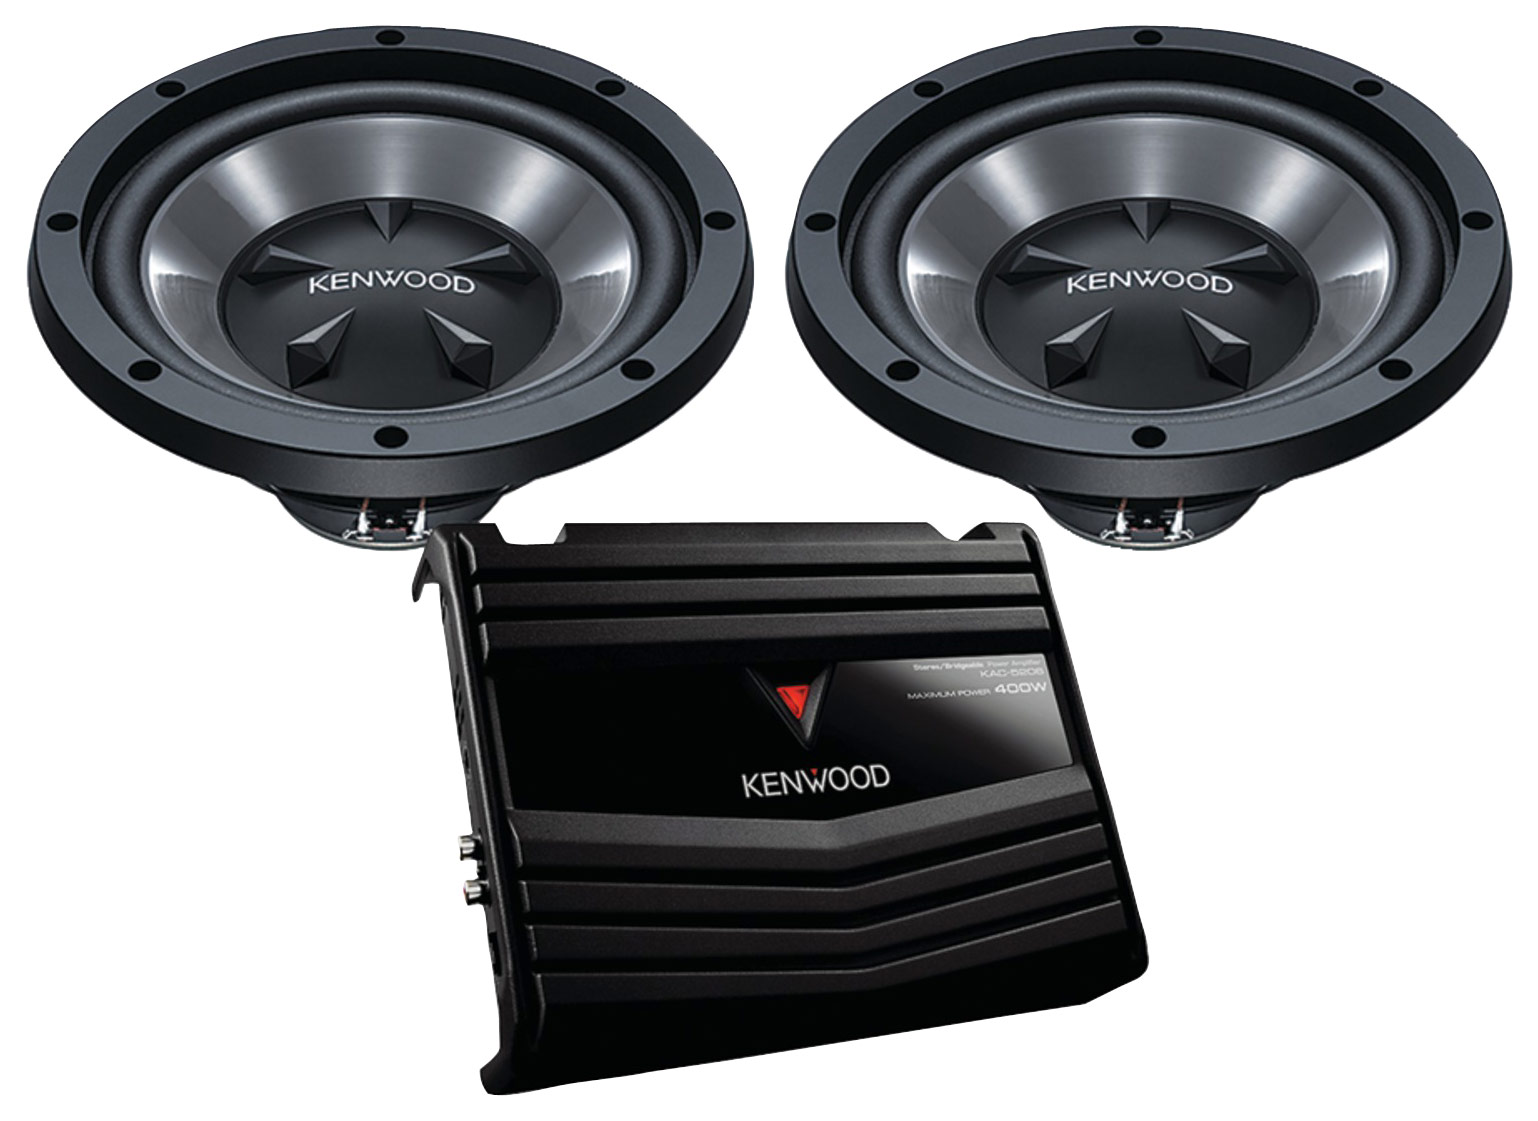 Best Buy Kenwood 10" Subwoofers and Amplifier Black PW1020